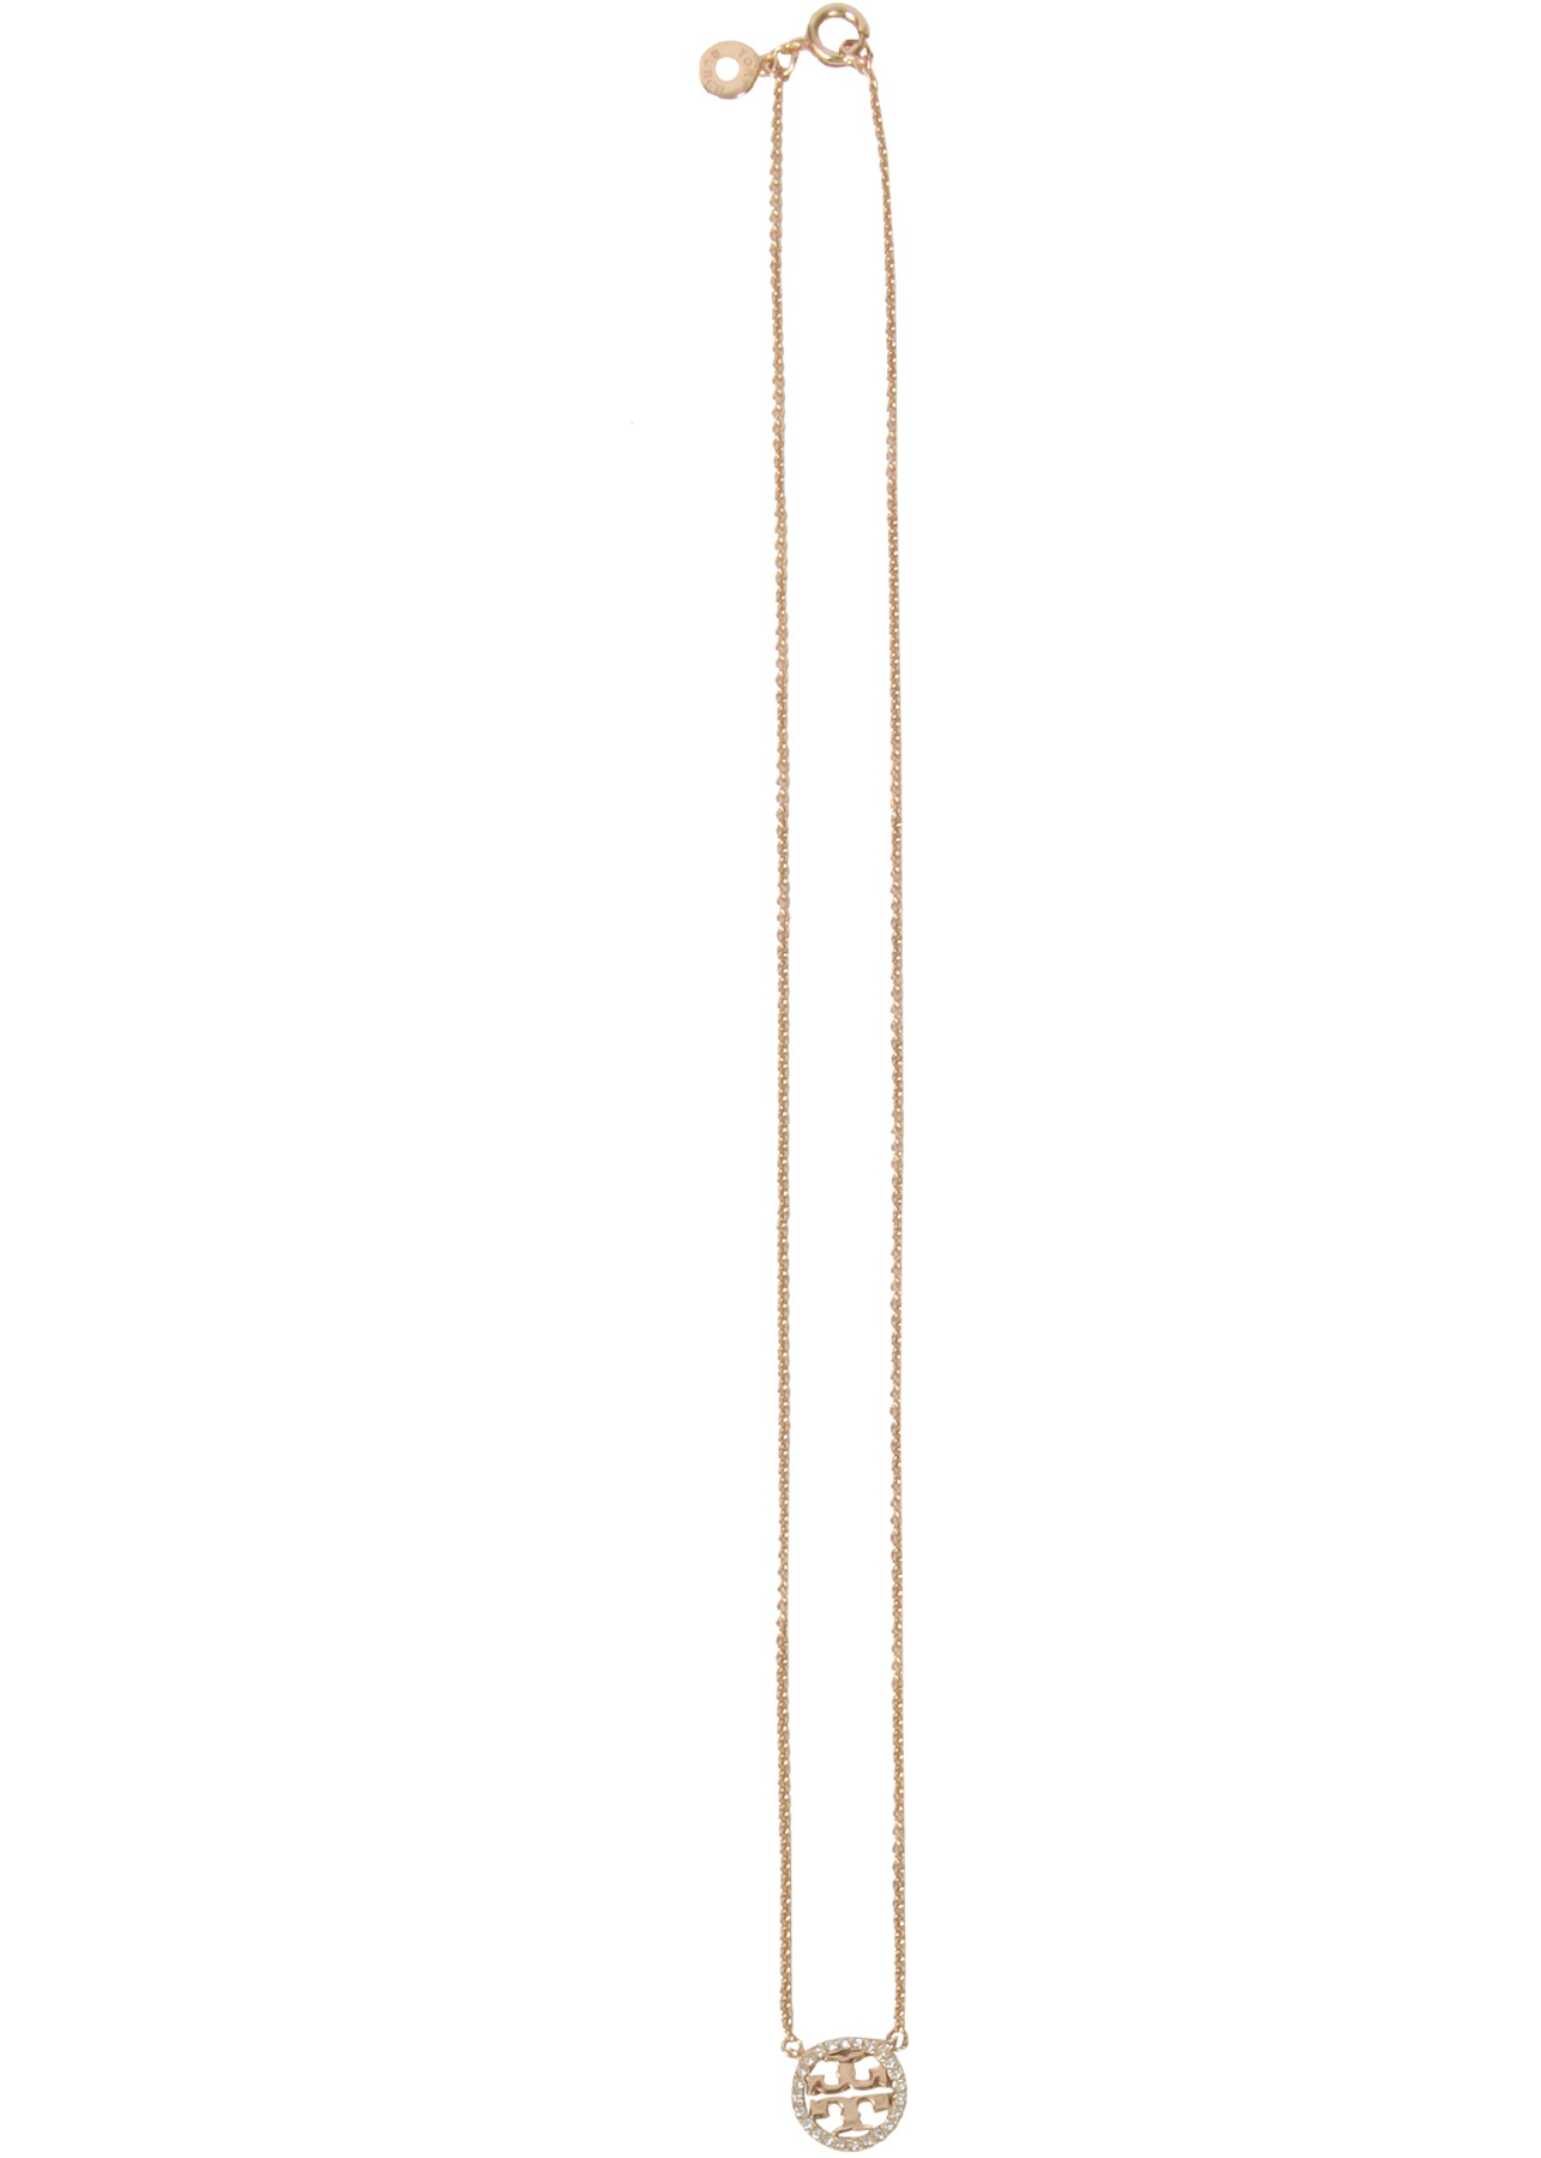 Tory Burch Necklace With Crystal Logo 53420_783 GOLD image